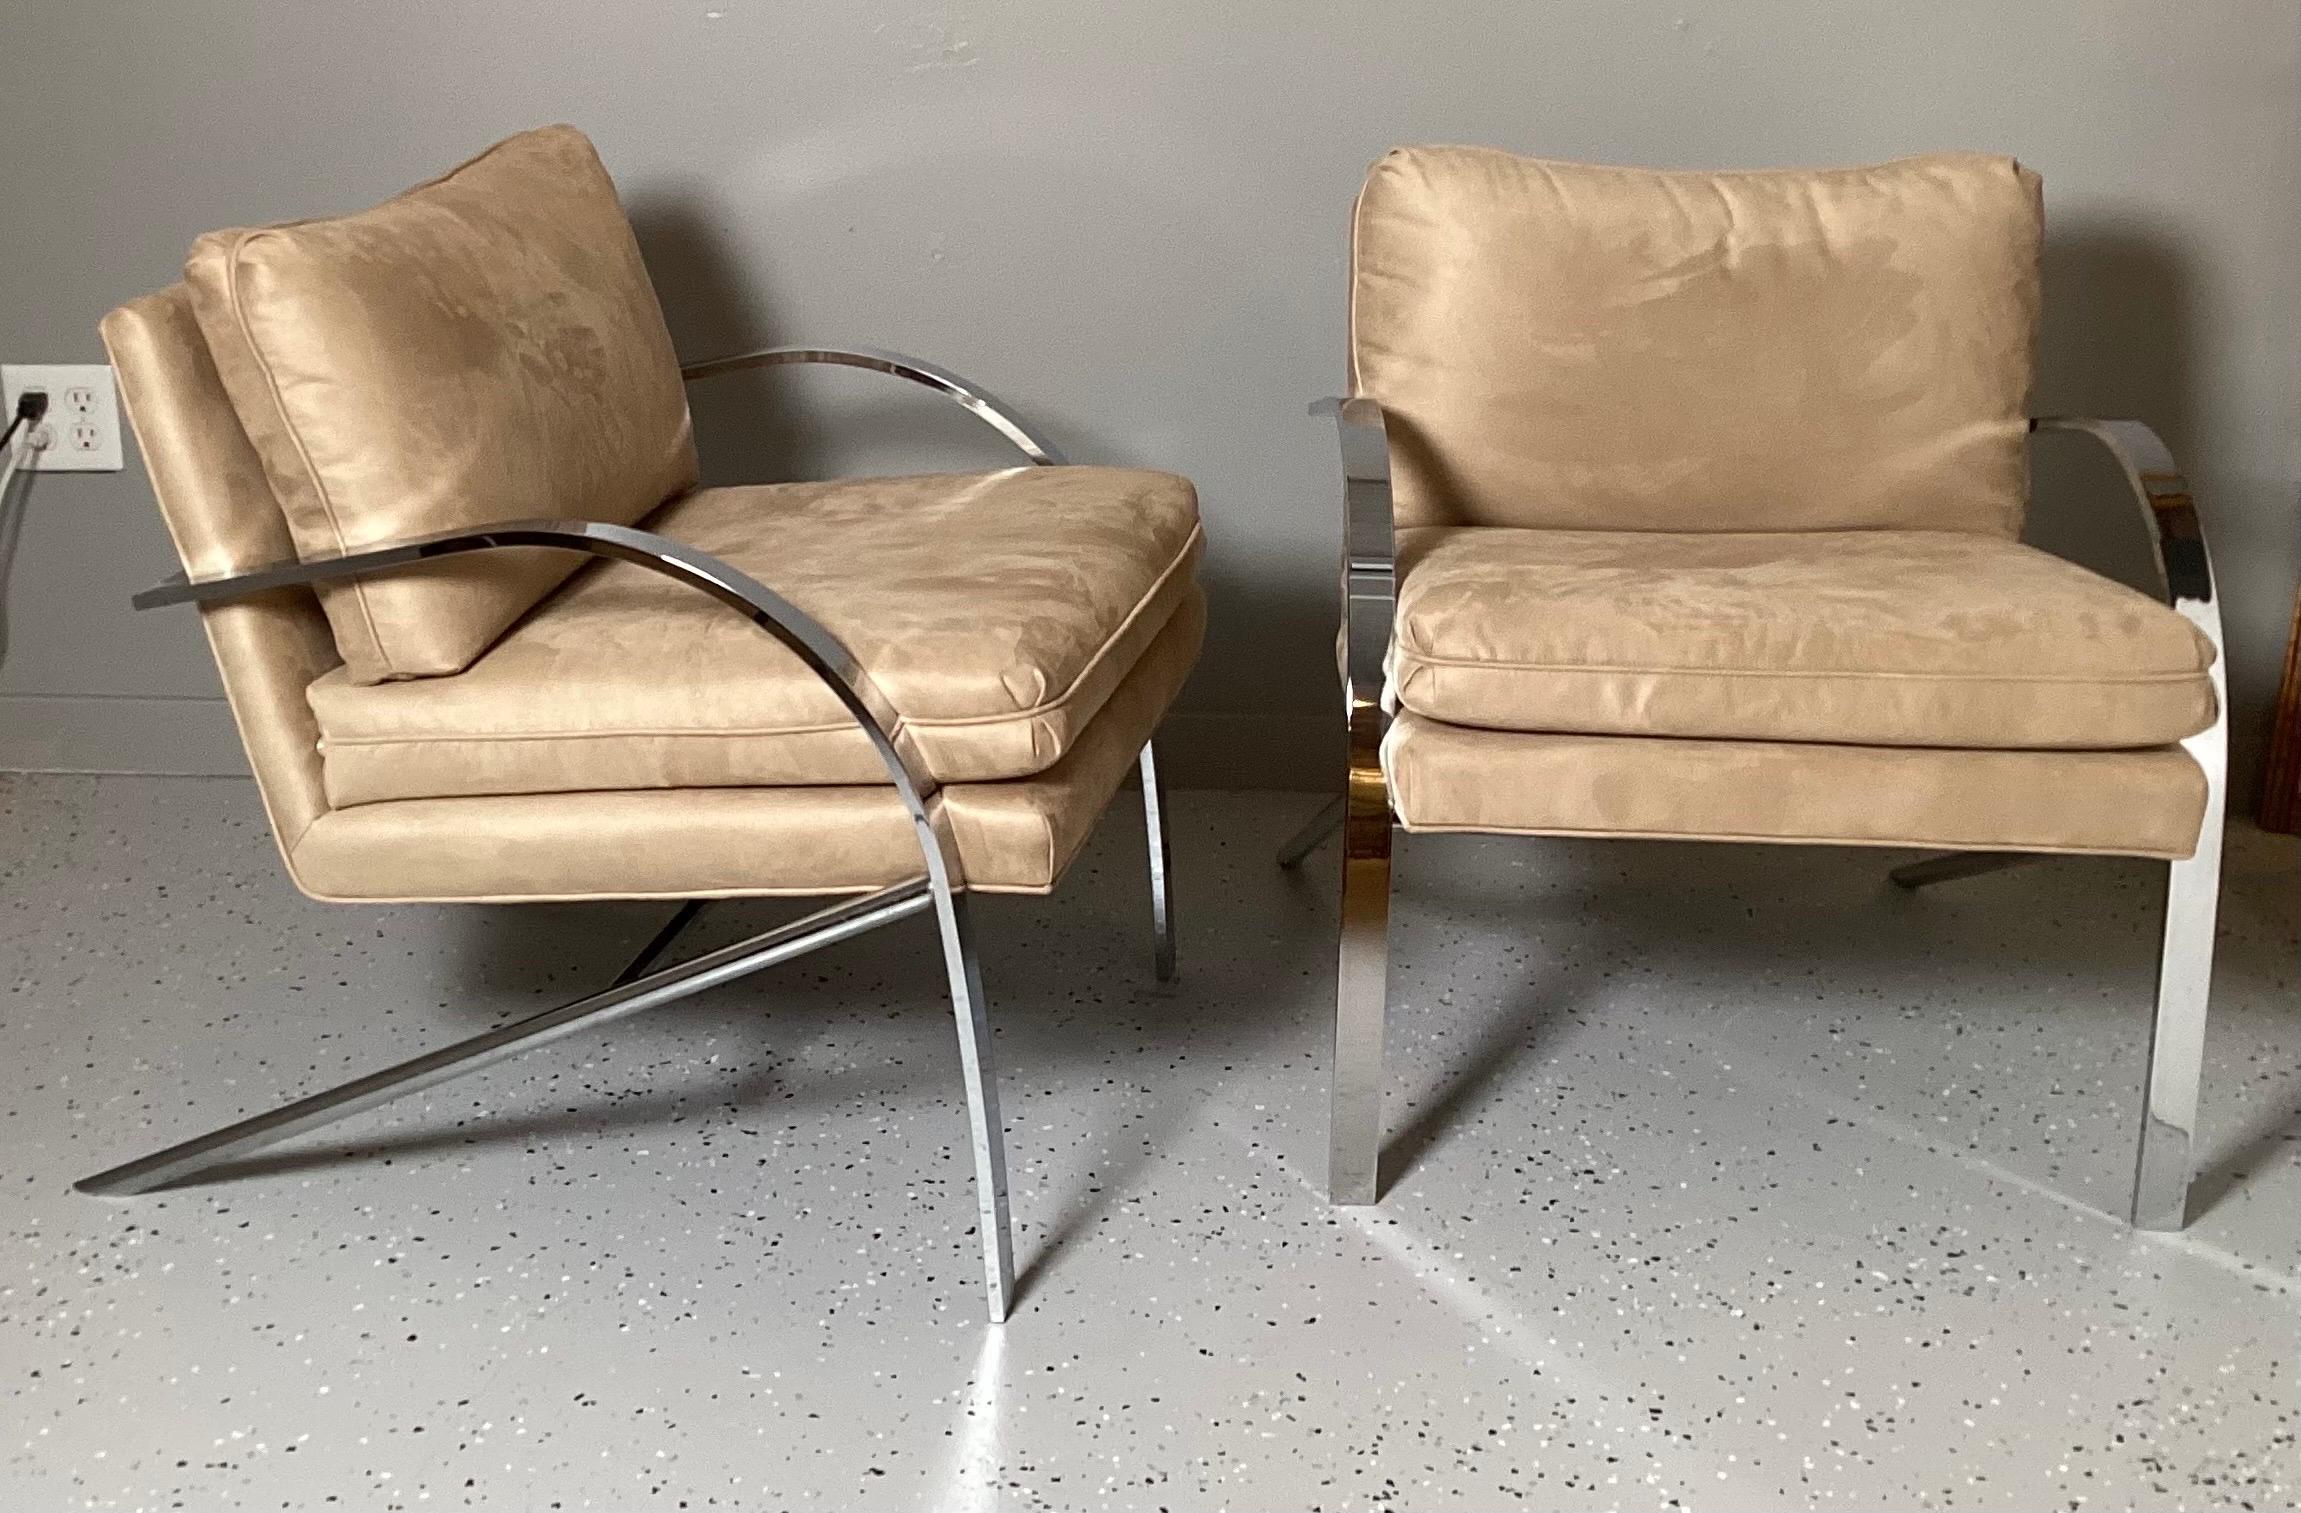 A Stunning pair of Paul Tuttle lounge chairs in tan Ultrasuede. The chrome is bright and in excellent condition the fabric is very clean.